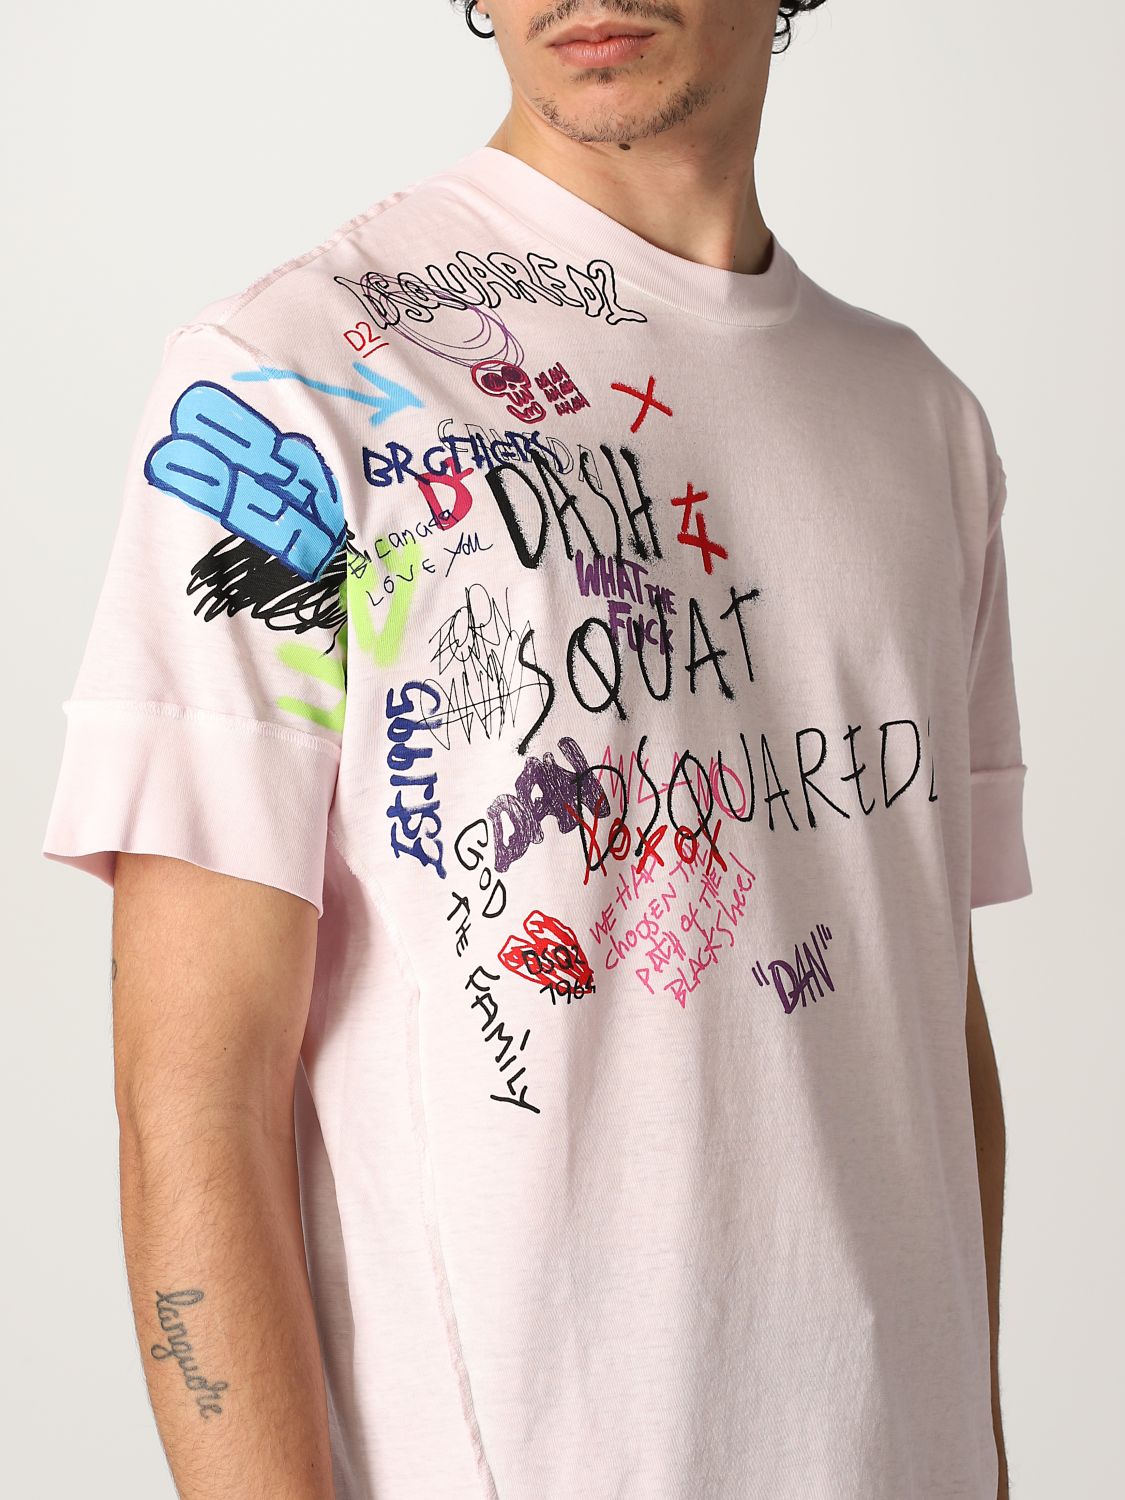 band Mysterie Besmettelijke ziekte DSQUARED2: T-shirt with graffiti prints - Pink | Dsquared2 t-shirt  S74GD0920S22507 online on GIGLIO.COM